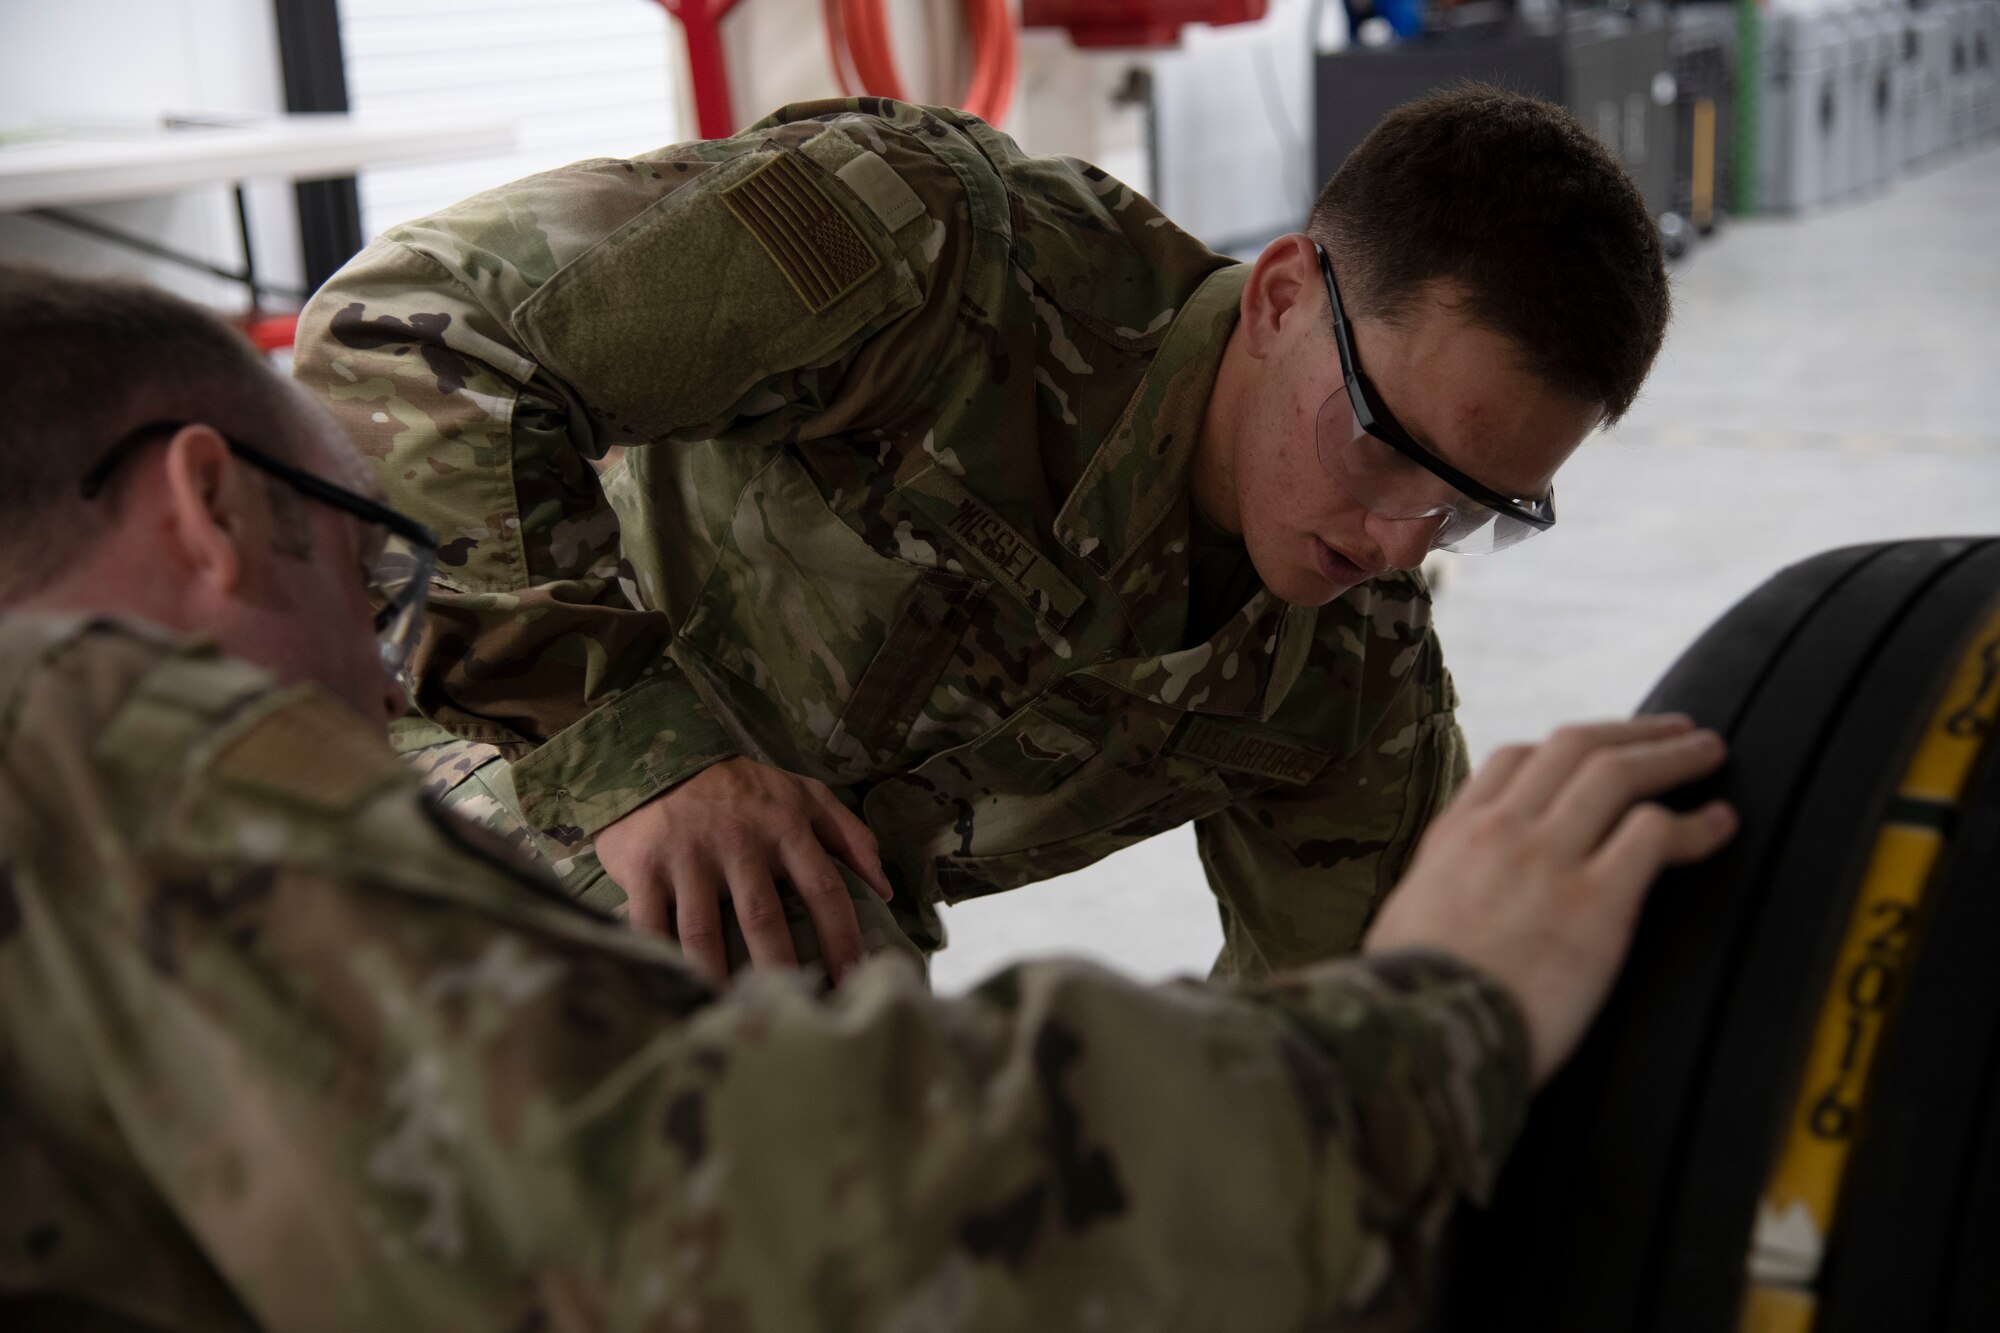 A1C Benjamin Missel inspects a landing gear trainer in the F-35 Academic Training Center, Eglin Air Force Base, Fla. on Mar. 12, 2020.